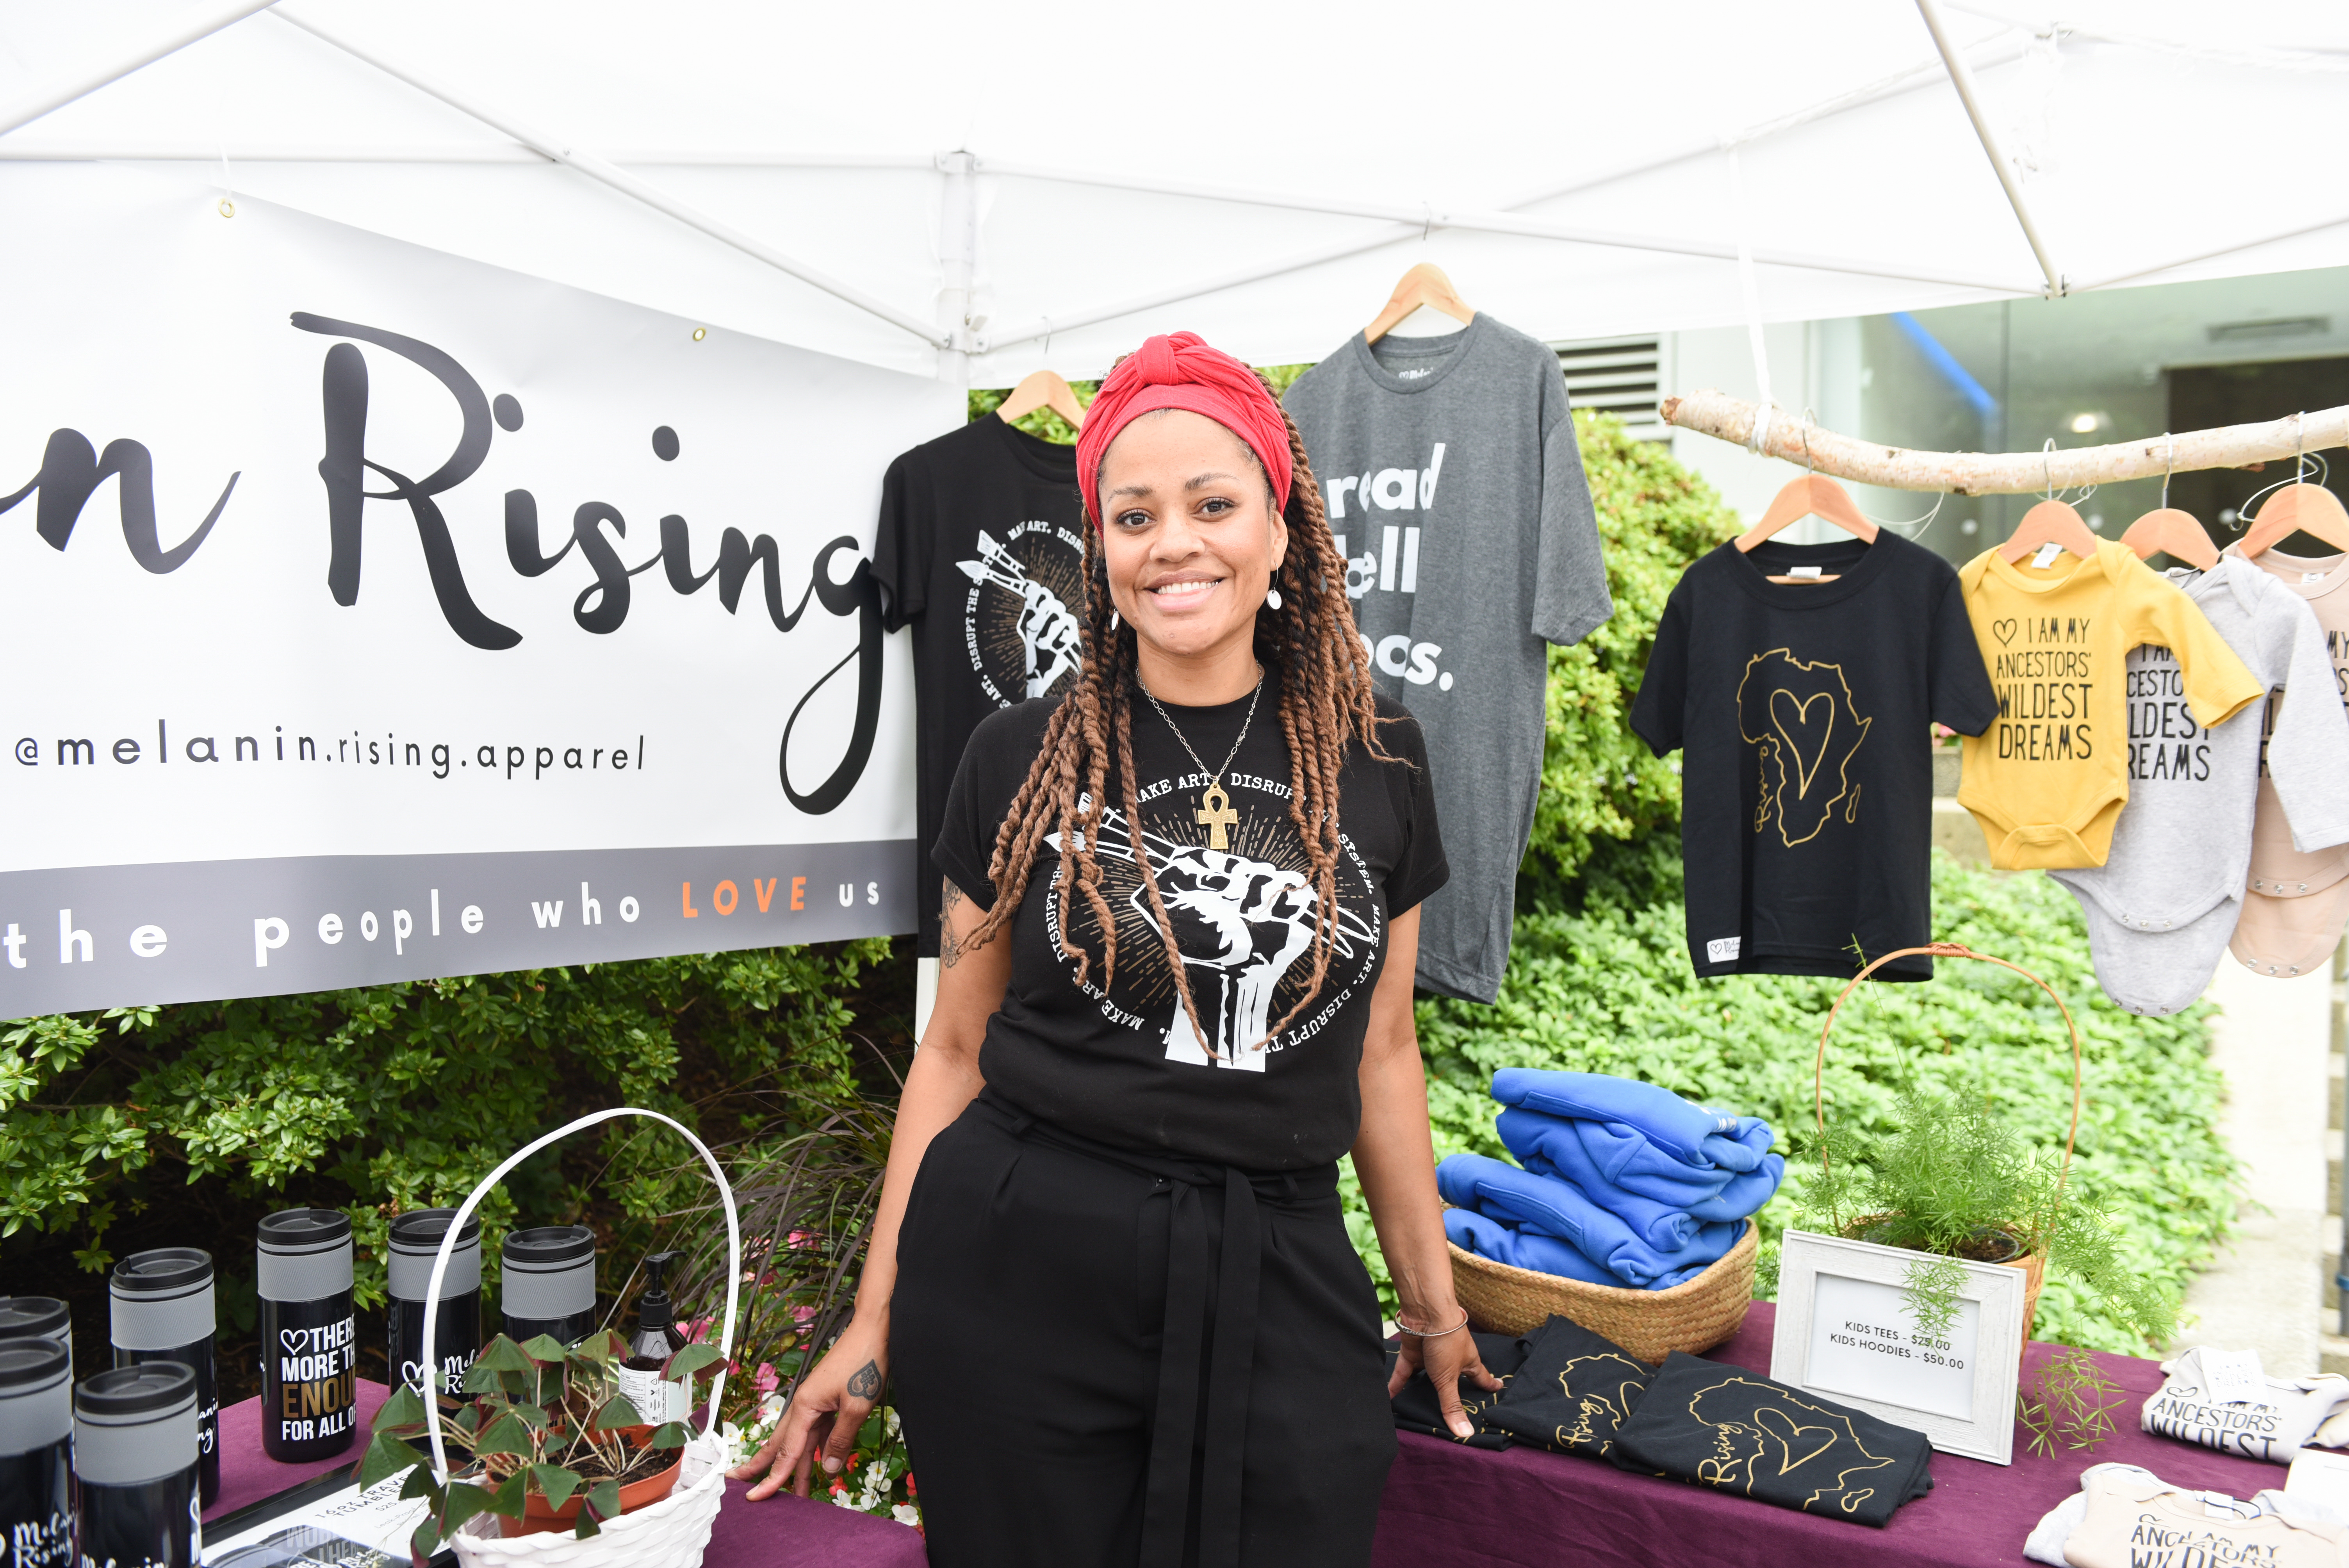 Naomi Grace of Melanin Rising who has long braids and is wearing a black t-shirt with a fist on it that is holding two paint brushes. Naomi is standing in her the Melanin Rising booth.